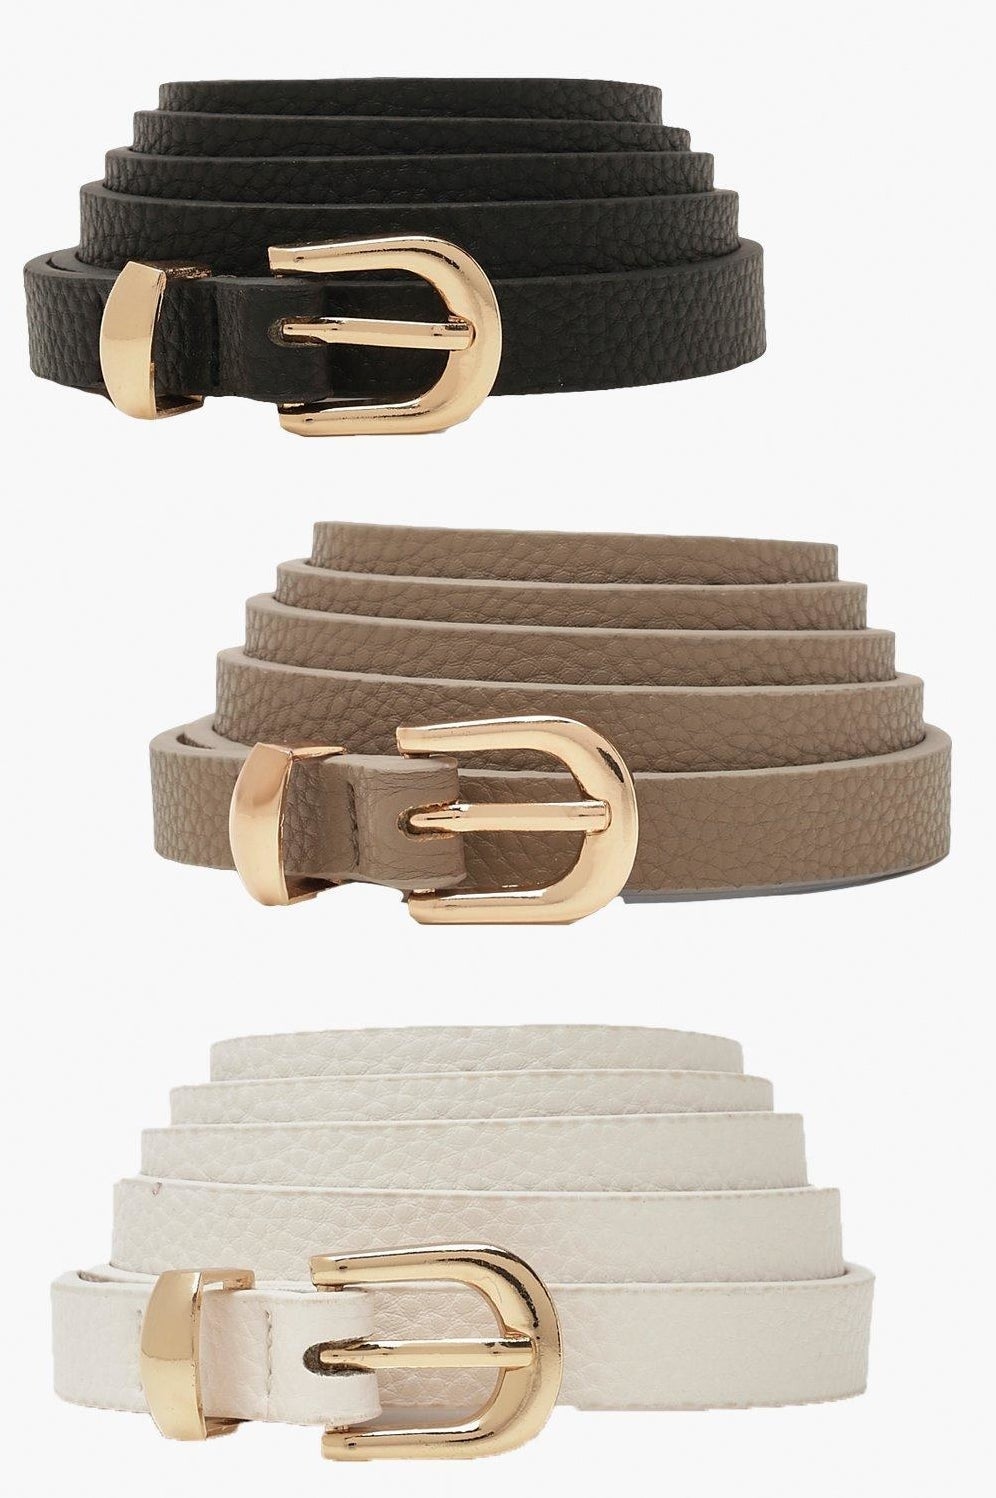 Two belts, one in black and one is beige with gold accents